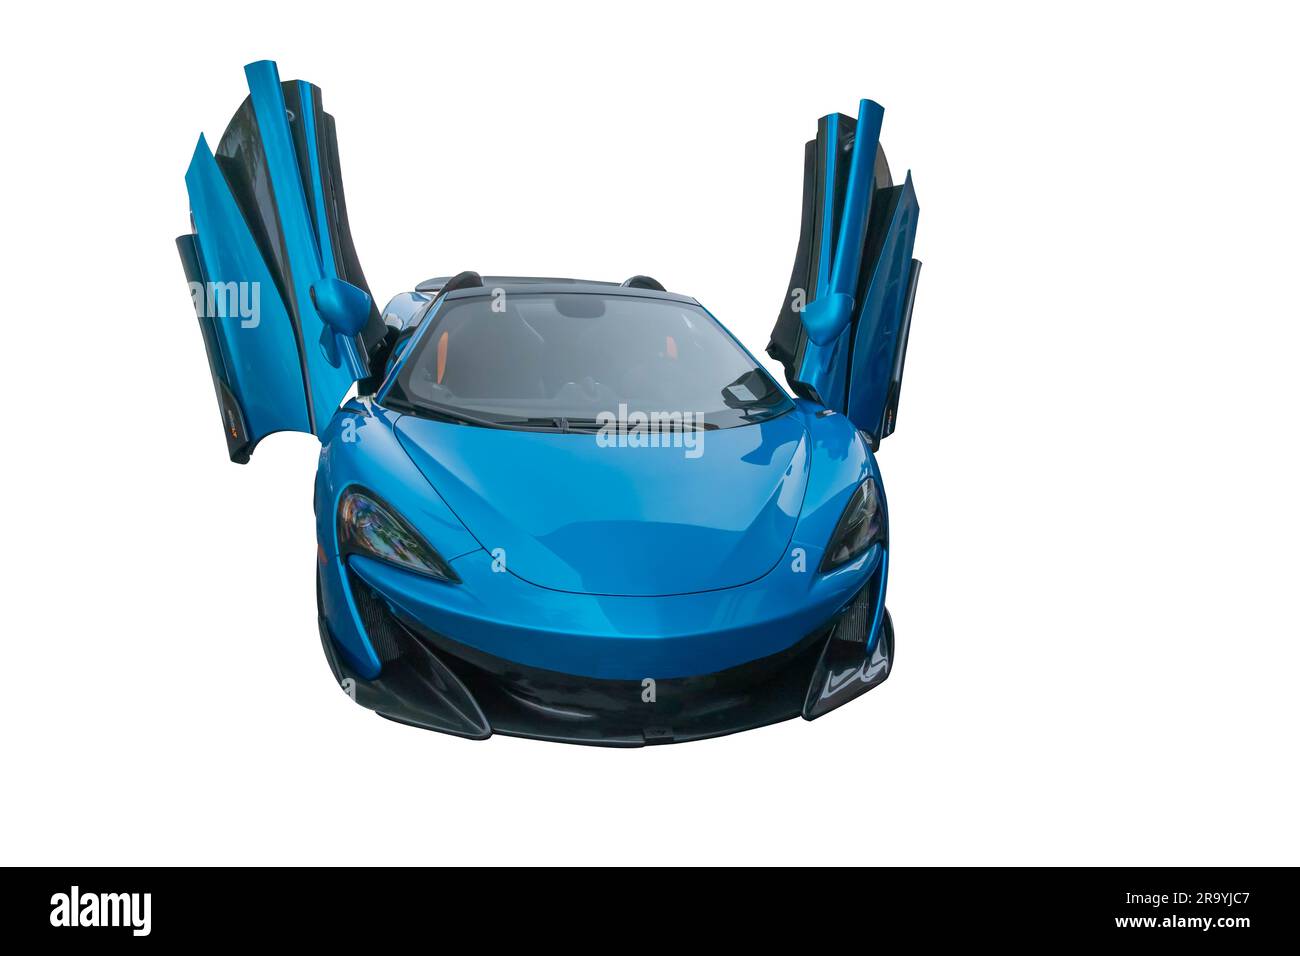 Isolation on a white background of a blue sports car with raised doors Stock Photo